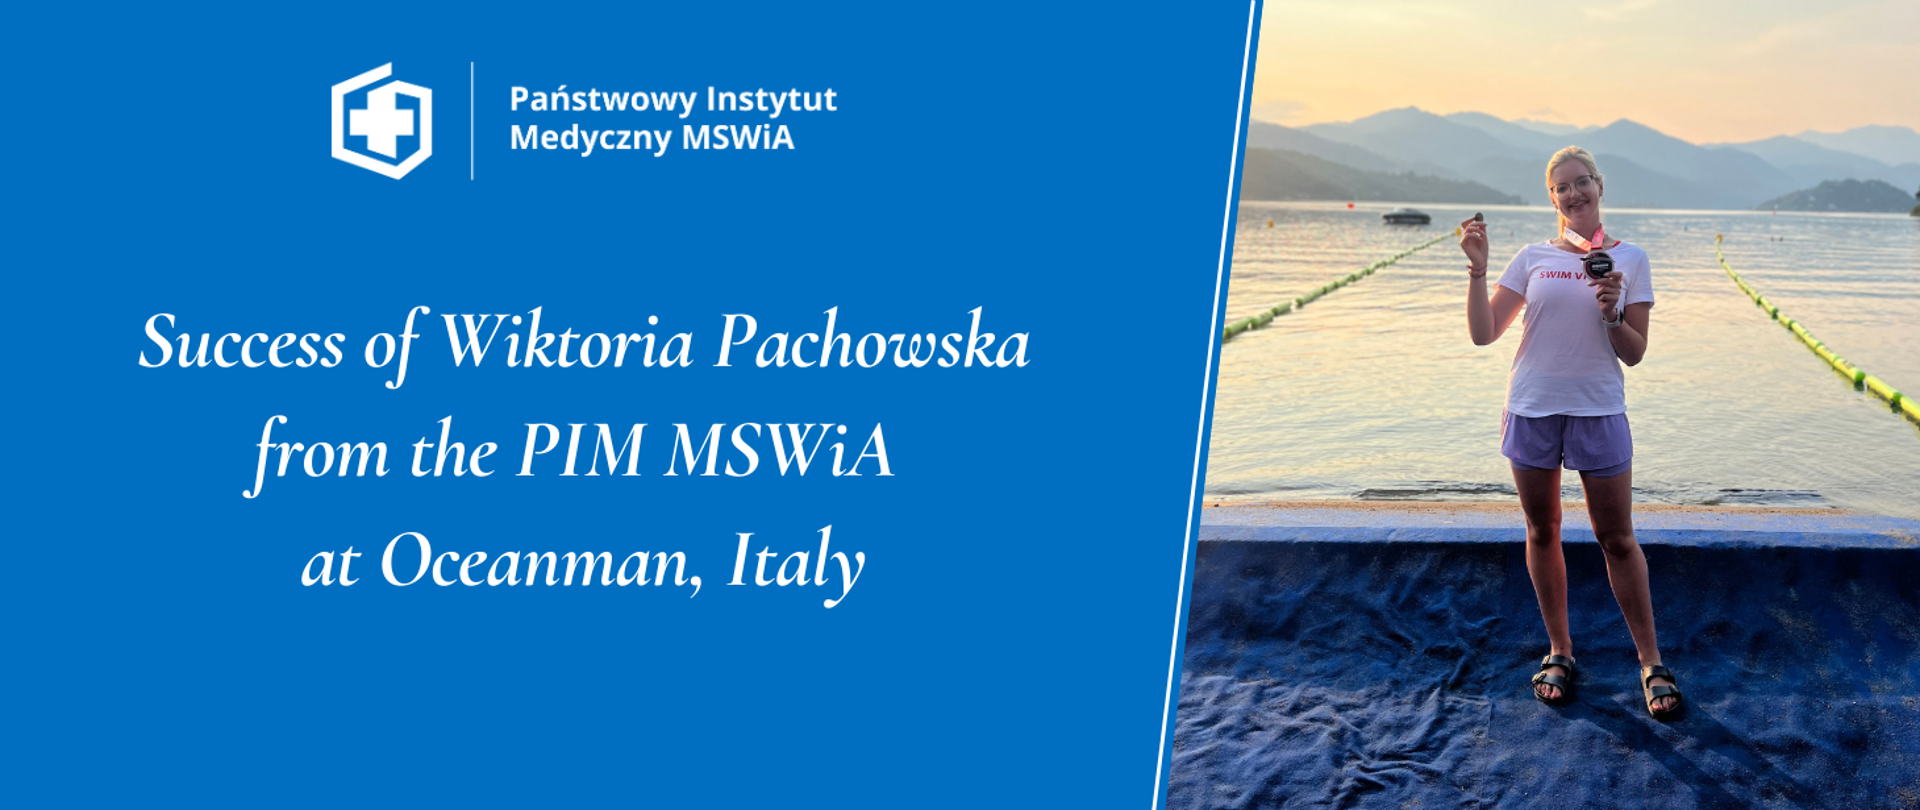 Success of Wiktoria Pachowska from the PIM MSWiA at Oceanman, Italy 